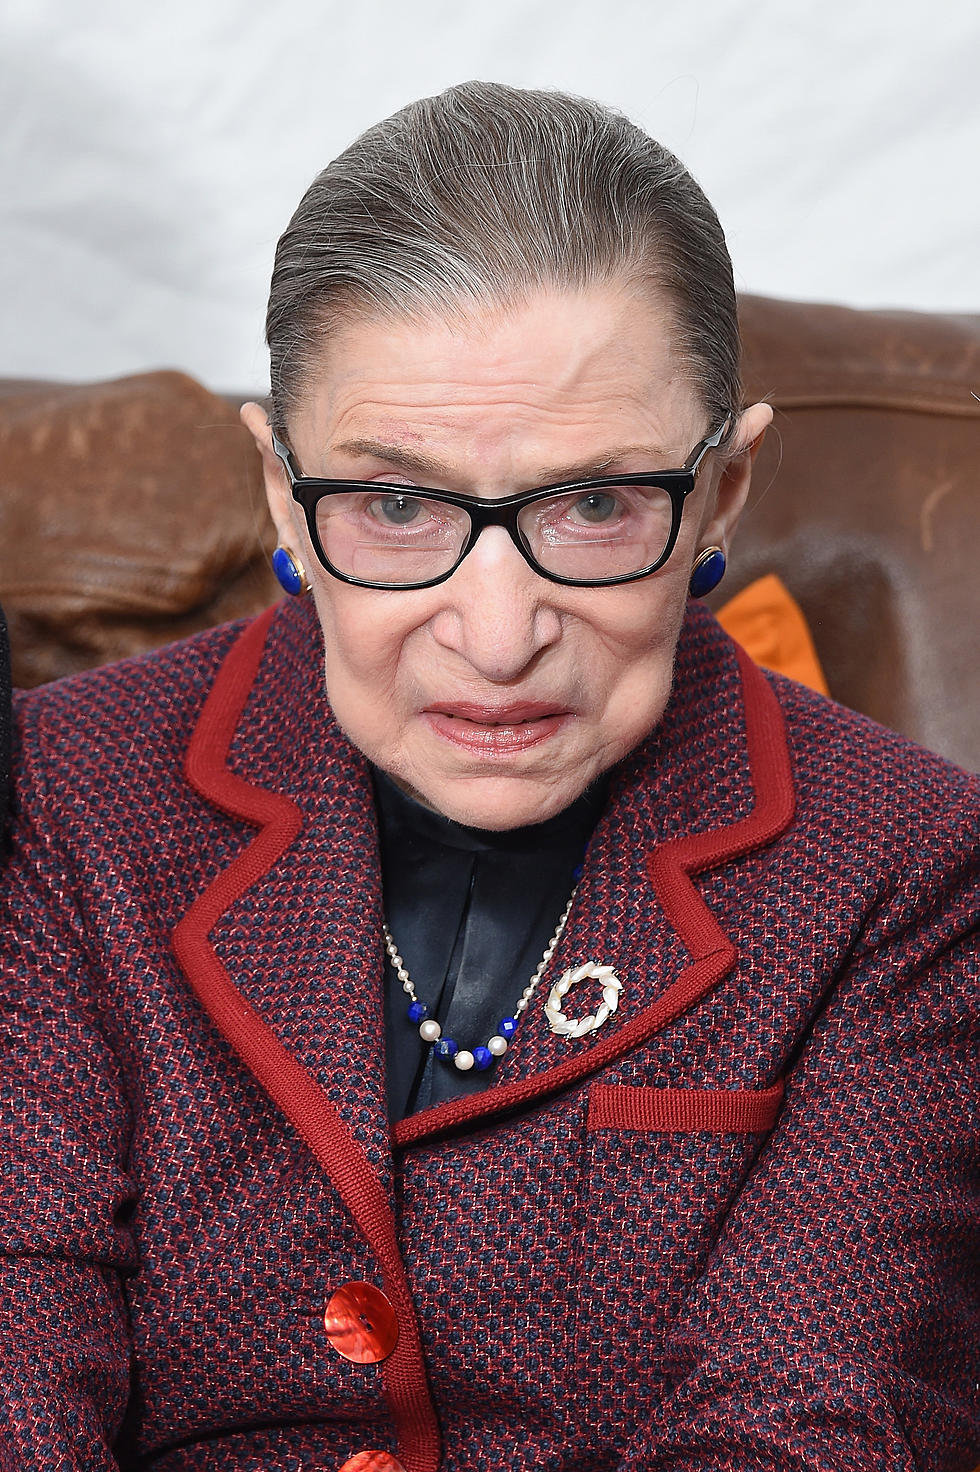 Supreme Court Justice Ruth Bader Ginsburg to Speak in Cooperstown in 2019